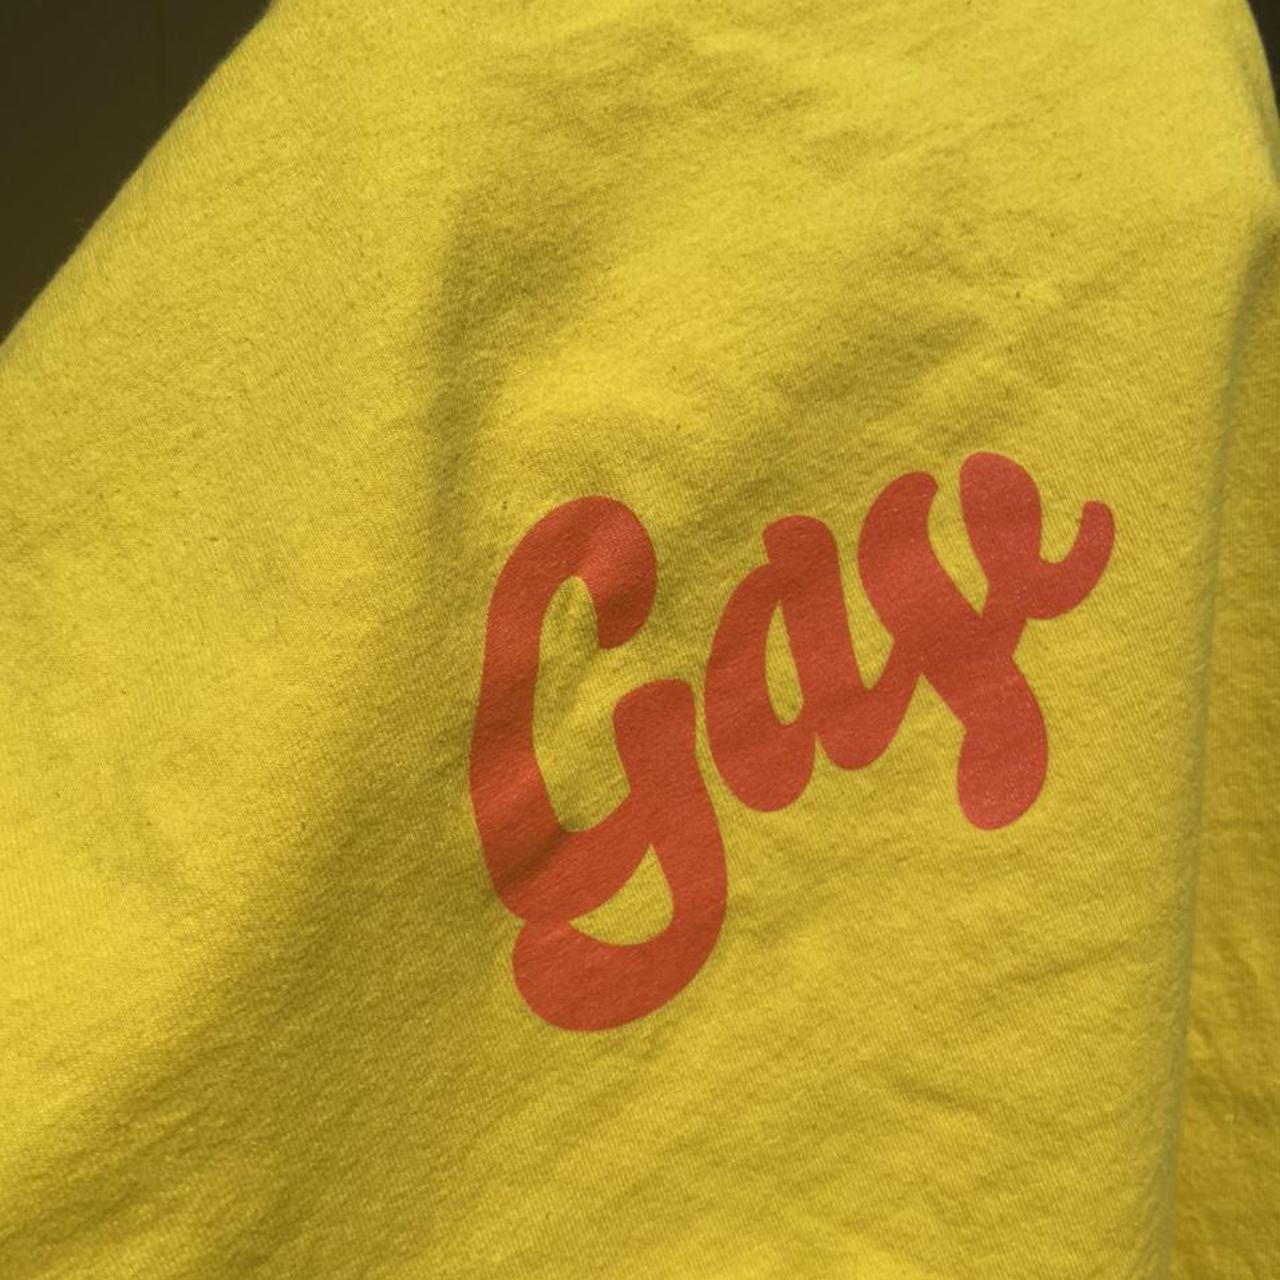 Product Image 3 - “Gay” T-Shirt
Brockhampton
Yellow
Size Med 
Condition: worn